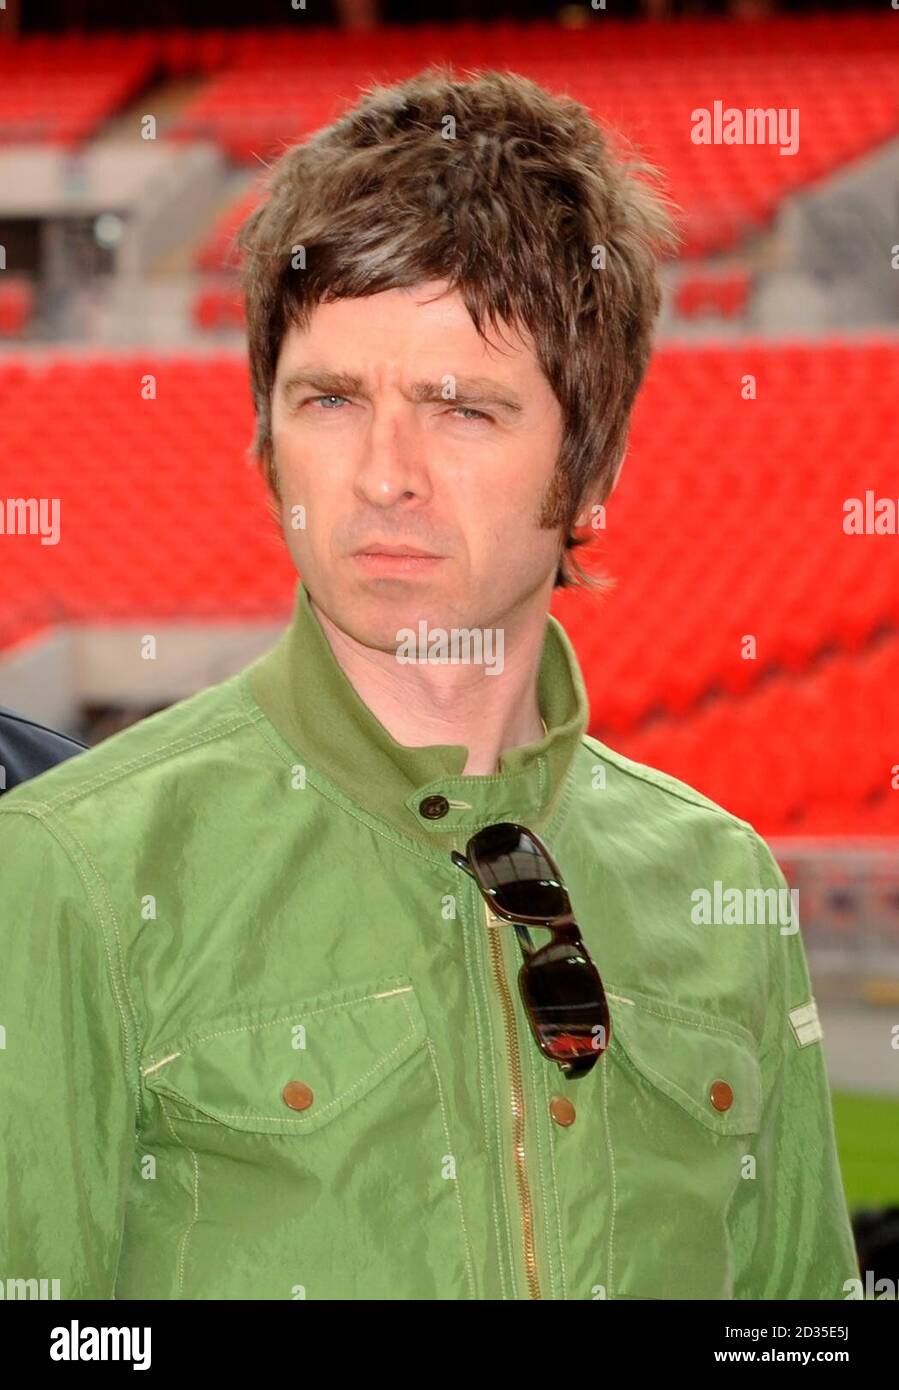 Oasis band member Noel Gallagher is pictured during a photocall at Wembley Stadium, where the band announced their biggest ever tour of open air venues in the UK and Ireland next summer. Stock Photo